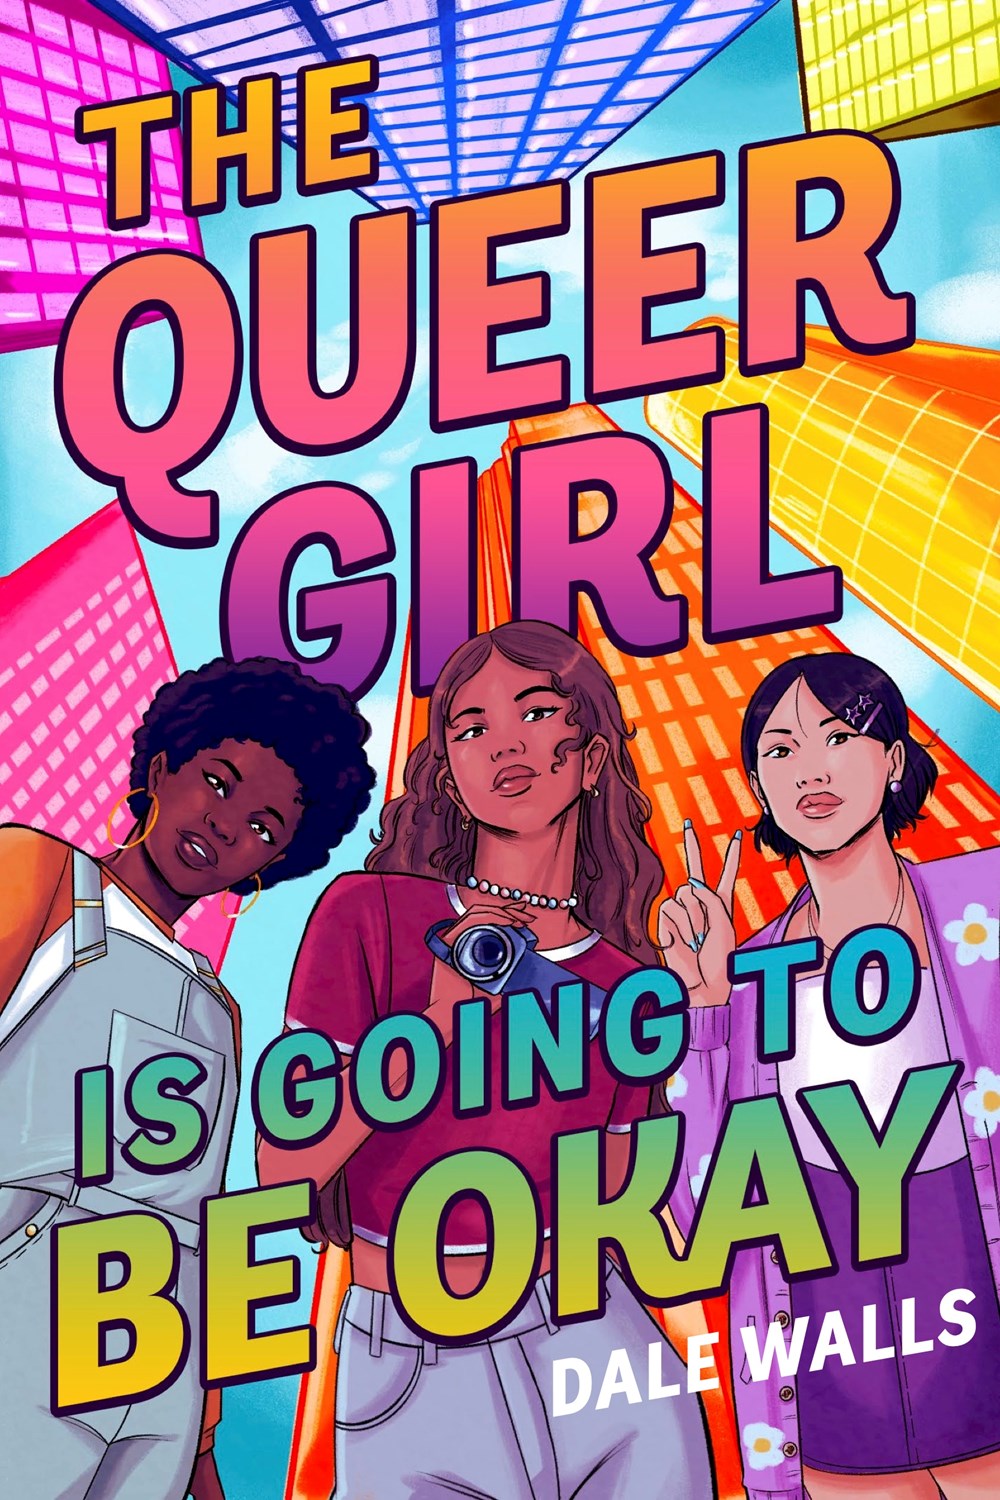 The Queer Girl Is Going To Be Okay by Dale Walls (Hardcover)